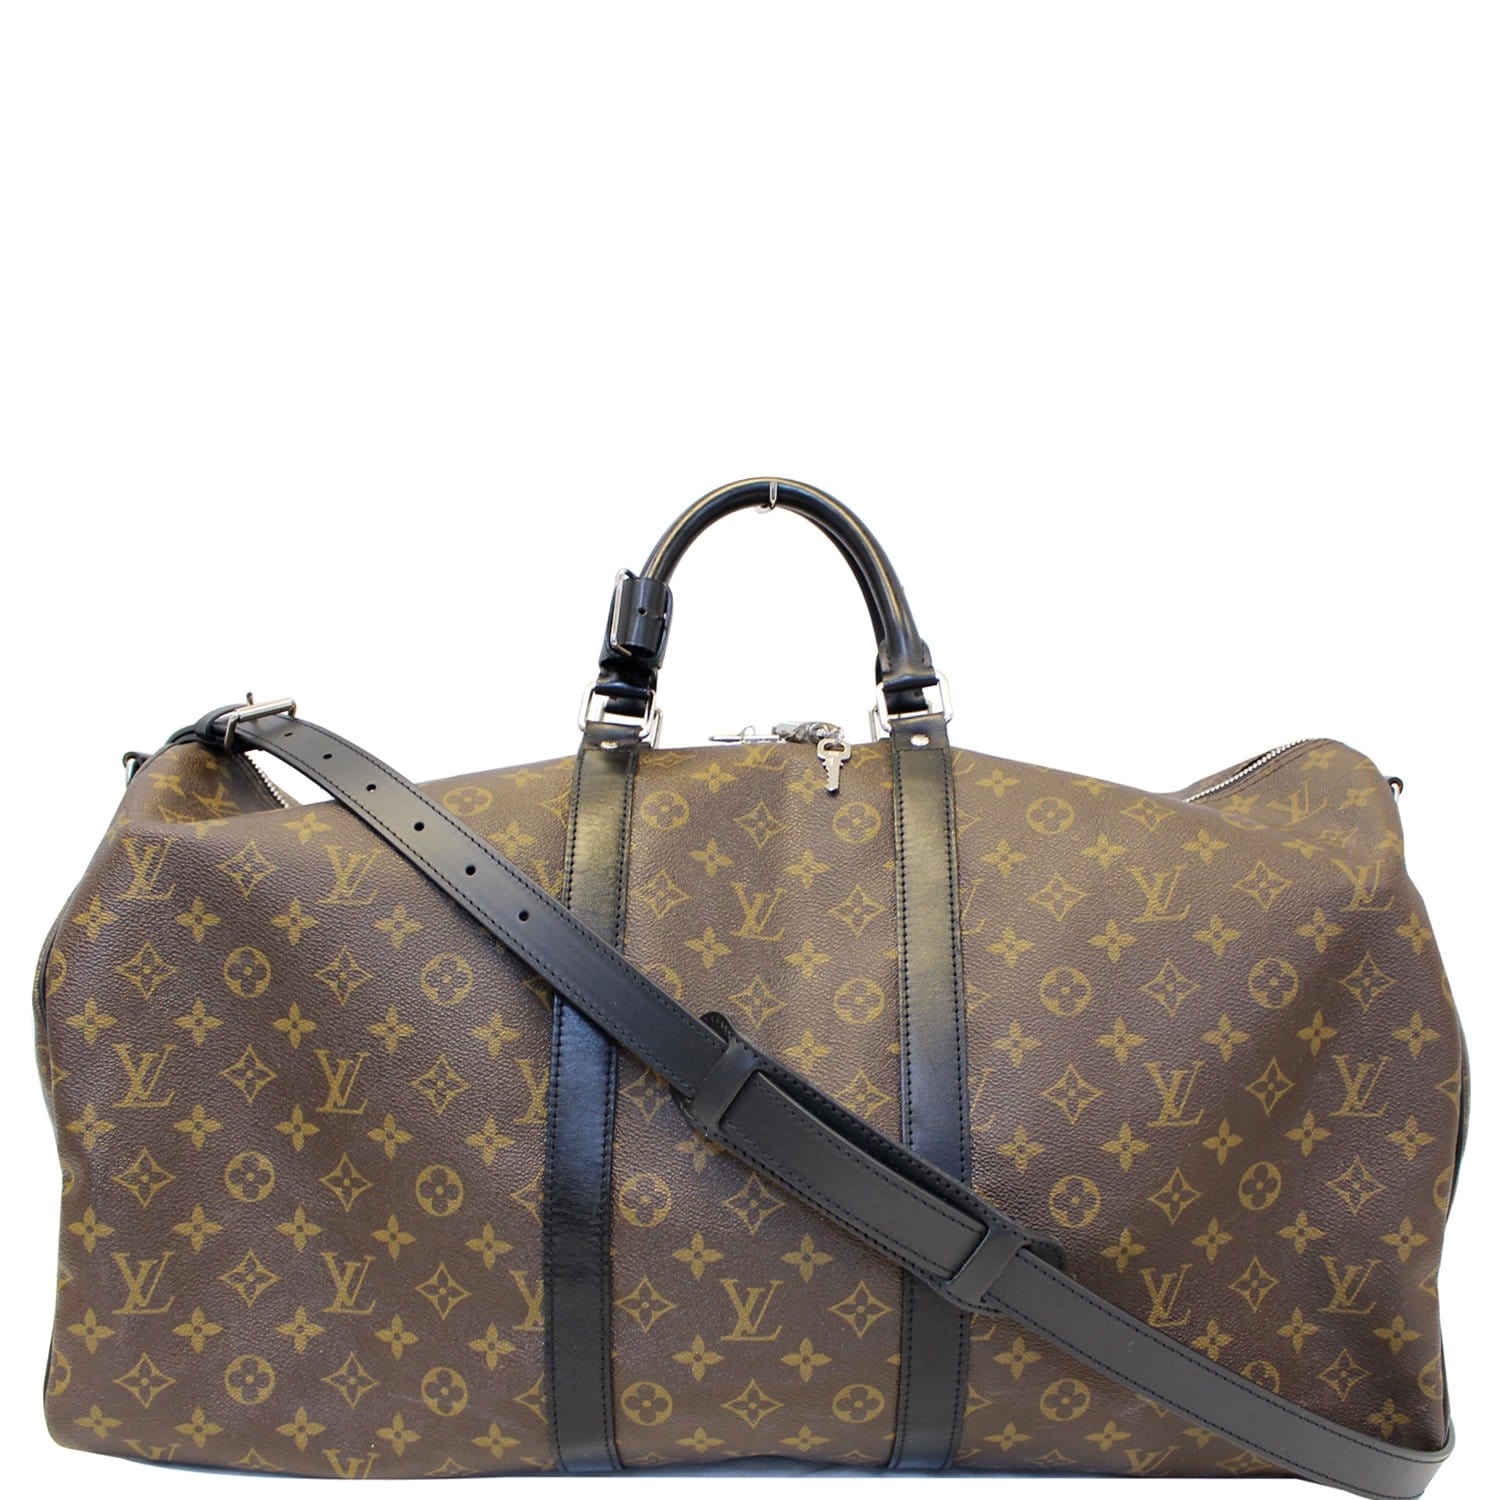 🔴 SOLD 🔴 $875 SHIPPED Pre-owned Authentic Louis Vuitton Keepall  Bandoulier 55 Monogram Travel Bag Serial / Date Code - VI0962 GREAT…